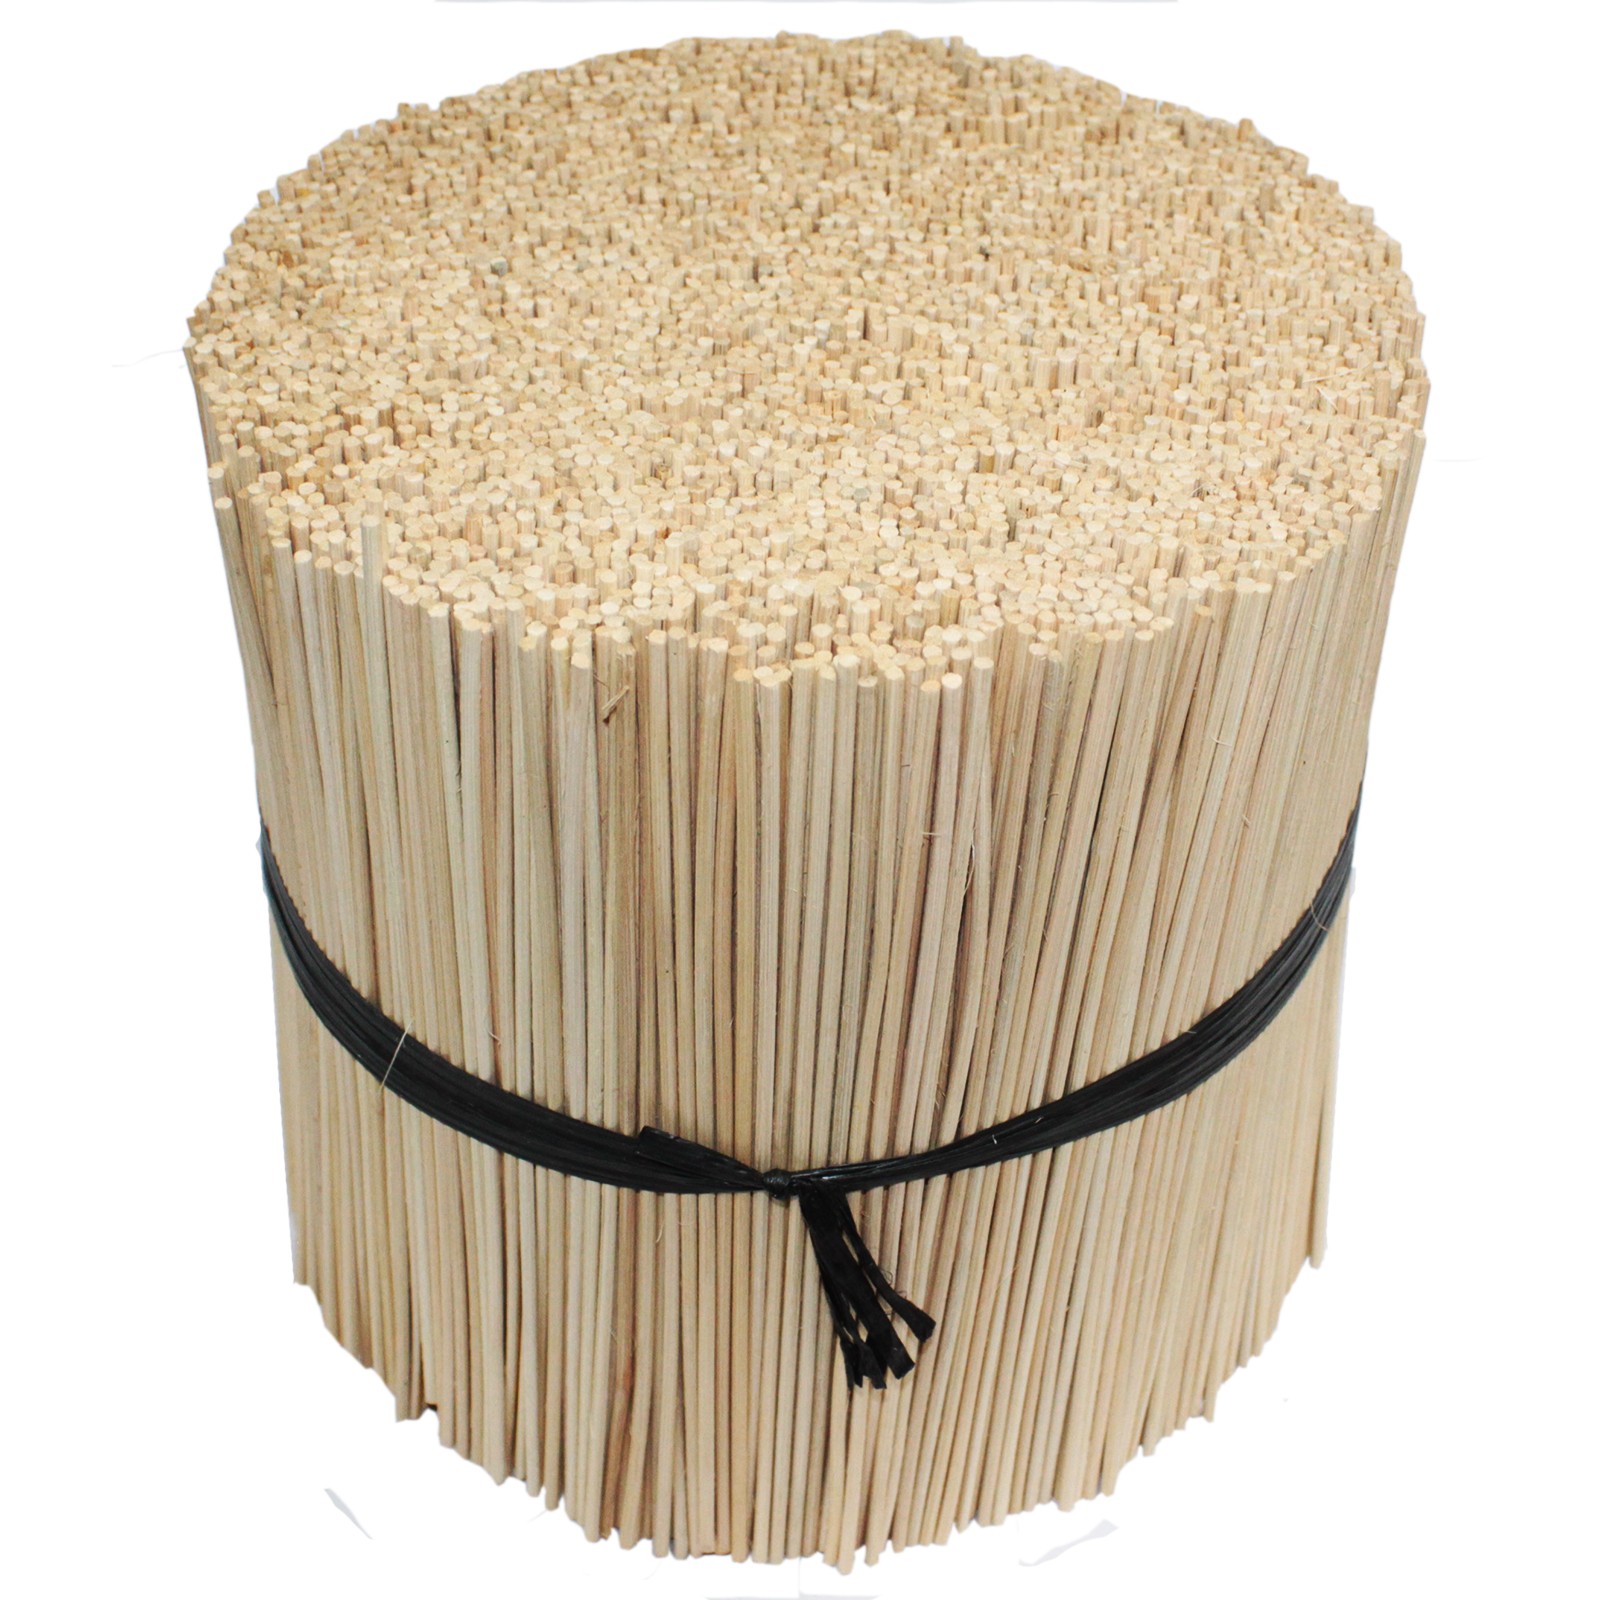 5kg of 2.5mm Reed Diffusers Approx 5000